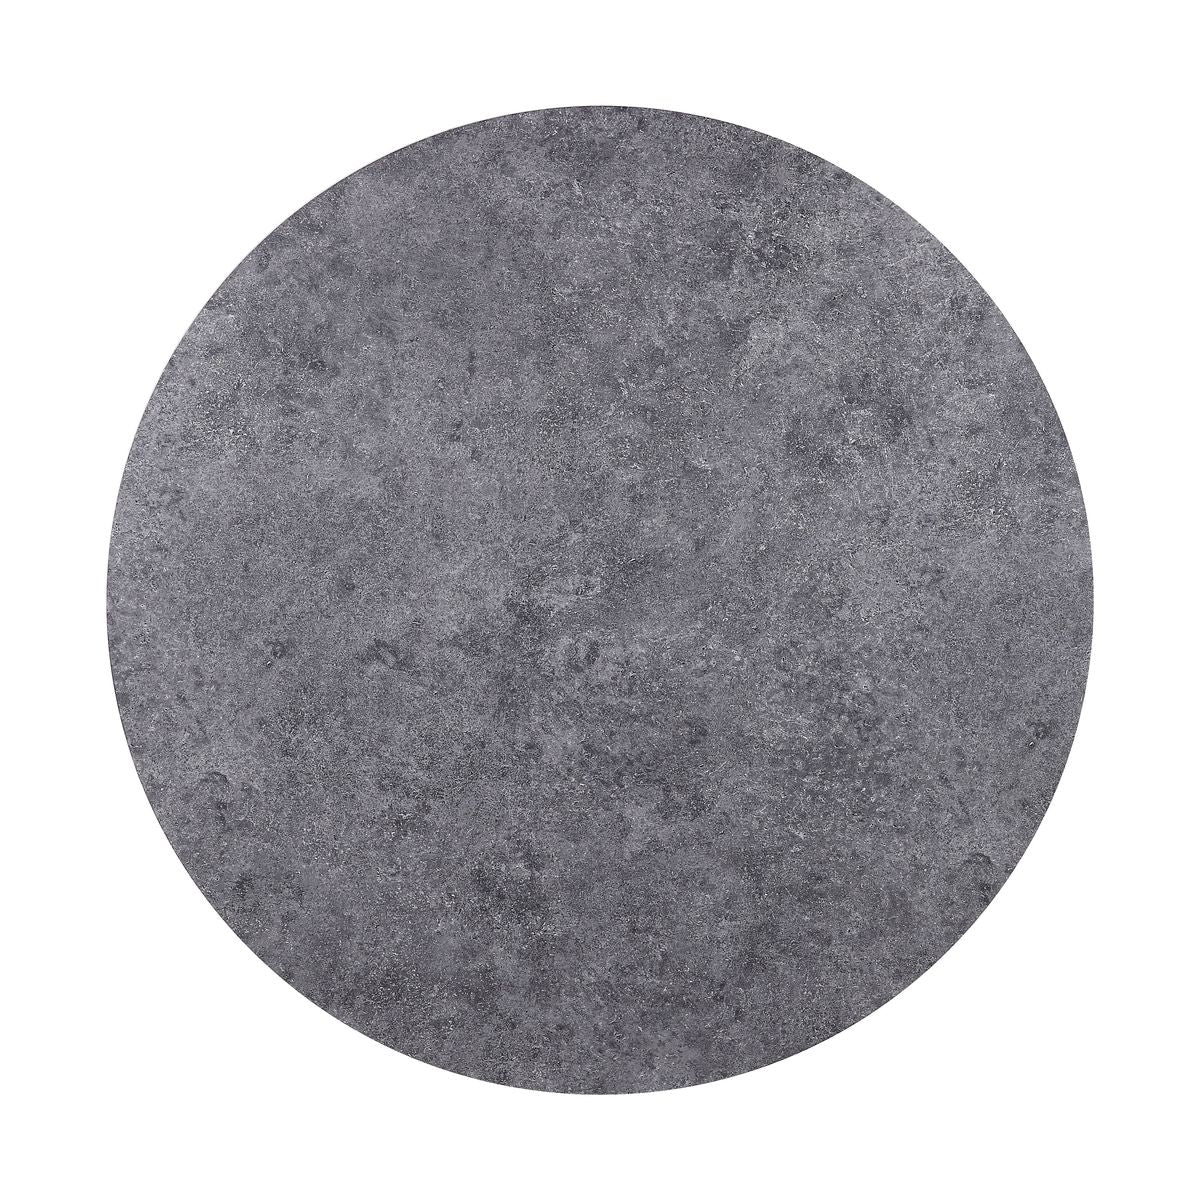 Ansonia Dining Table, Faux Concrete 77830